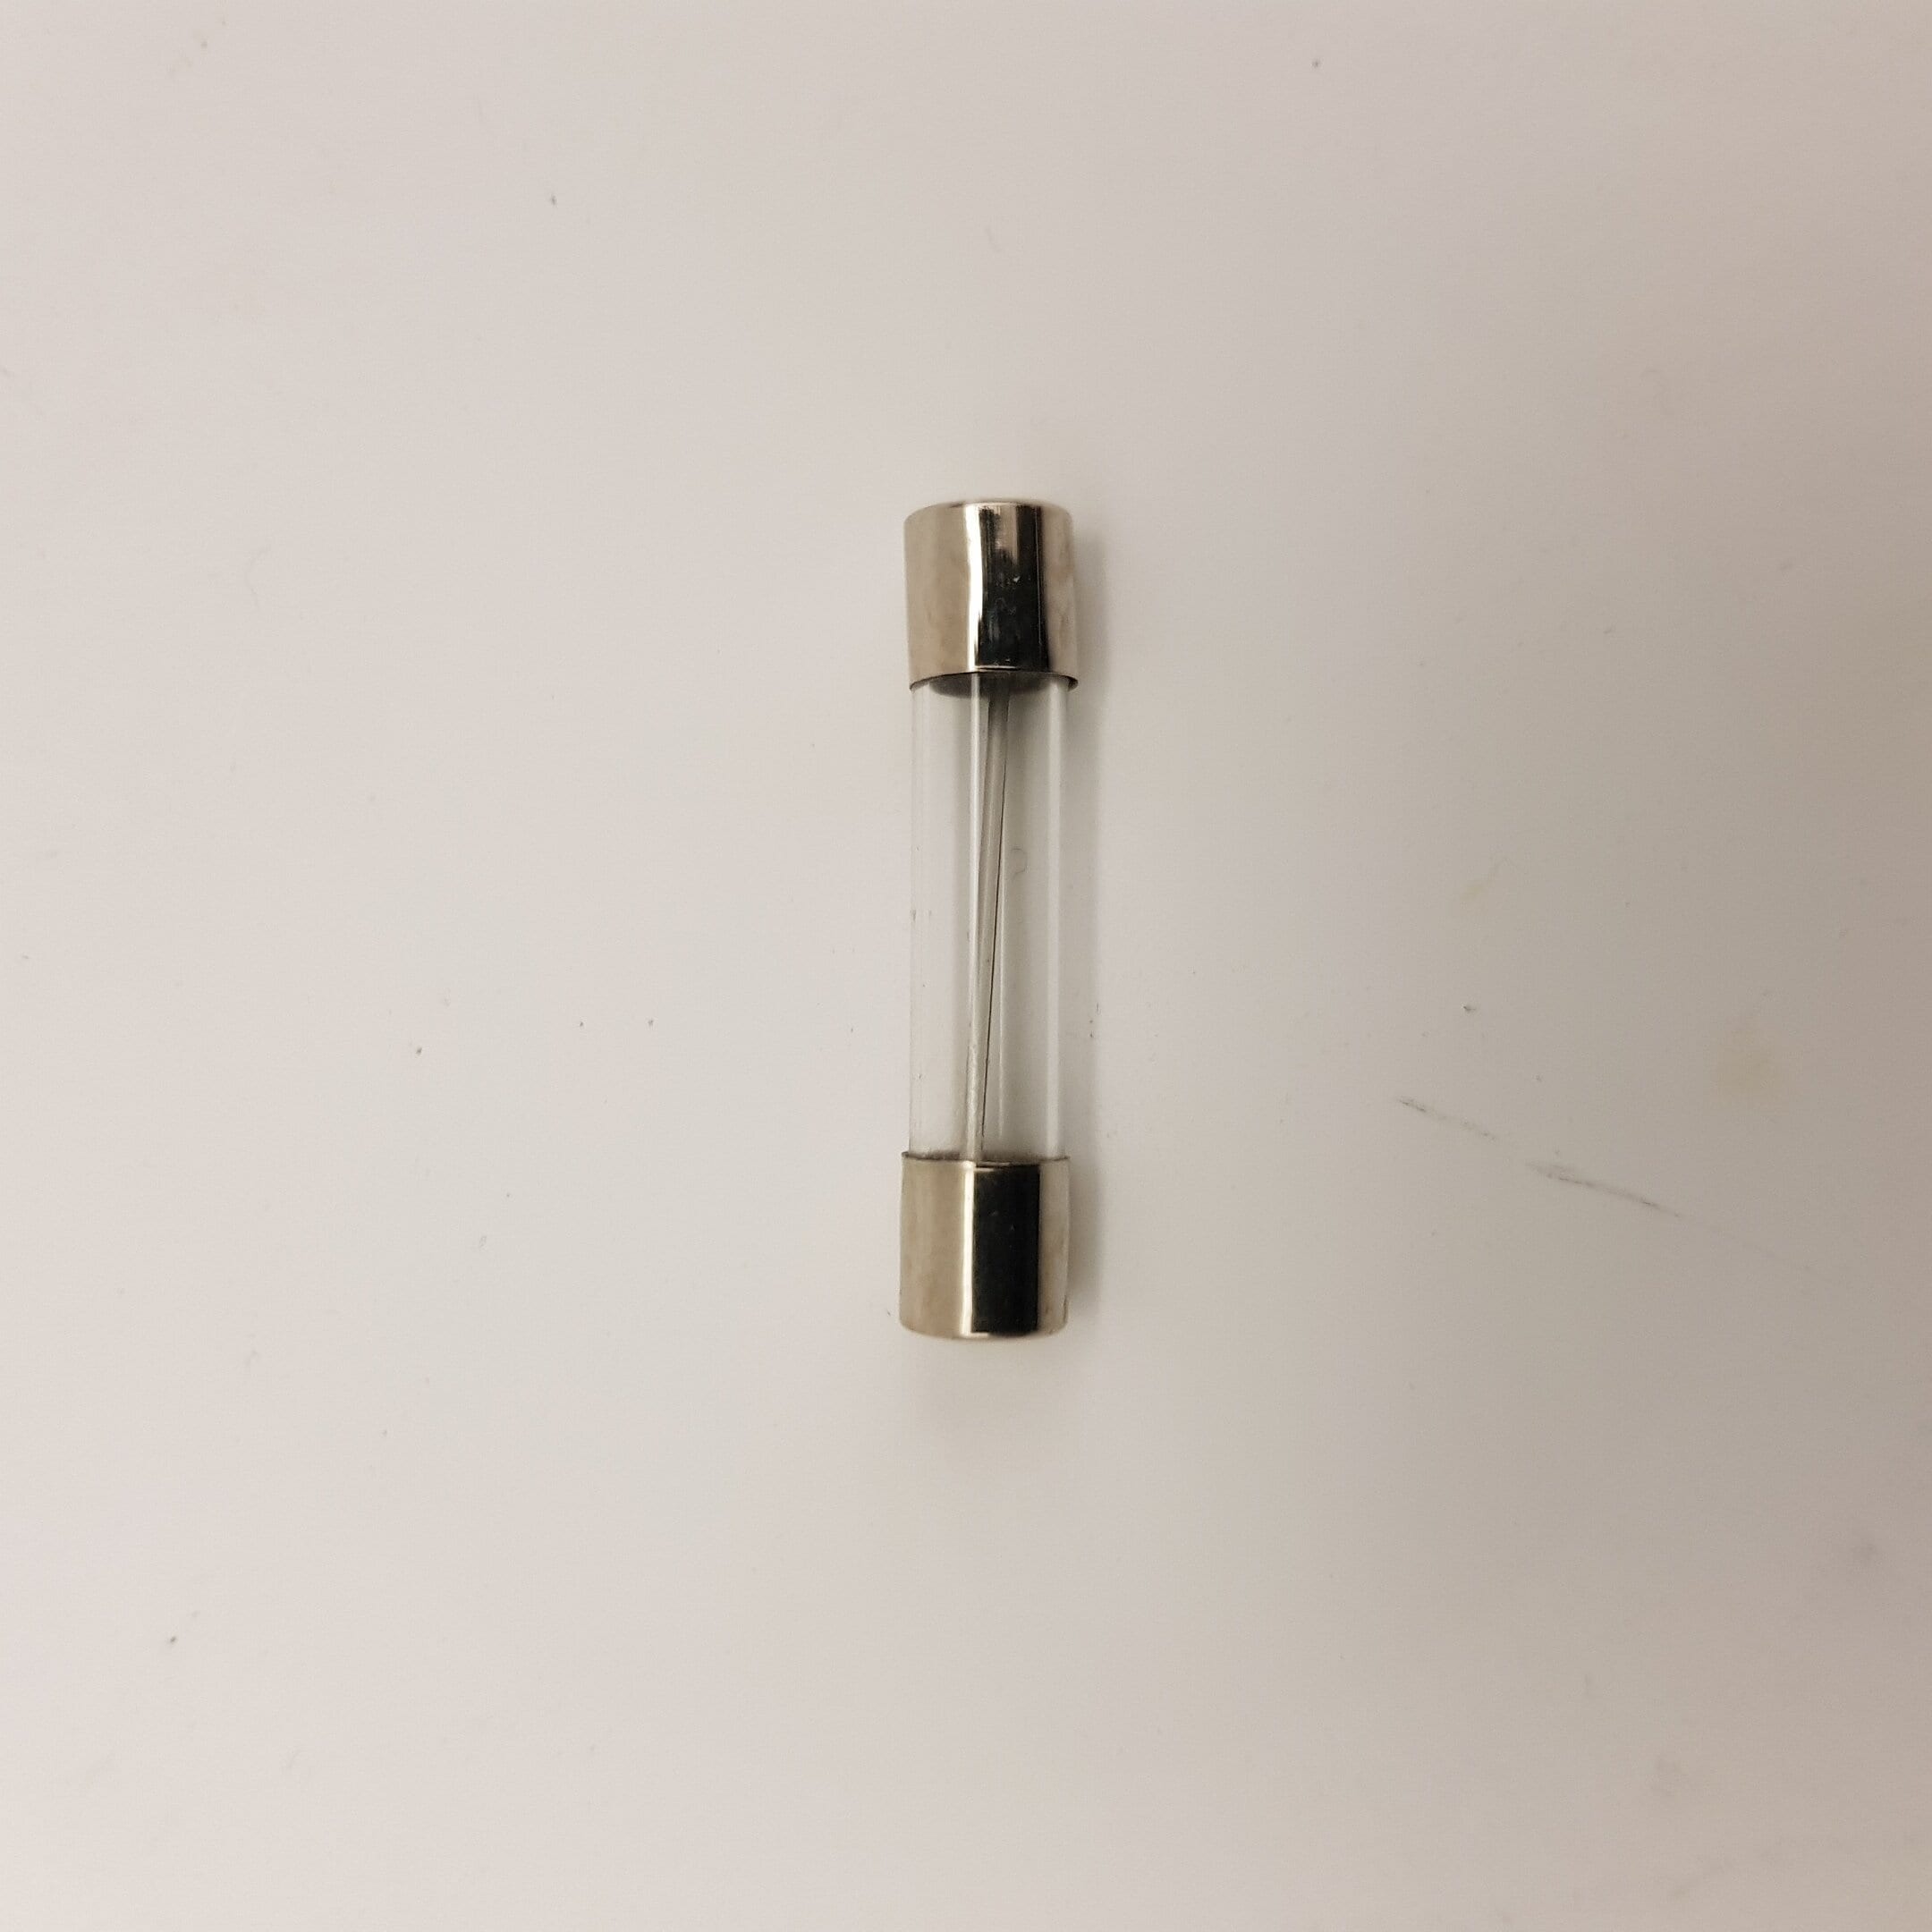 Sikring 25A glas 20mm